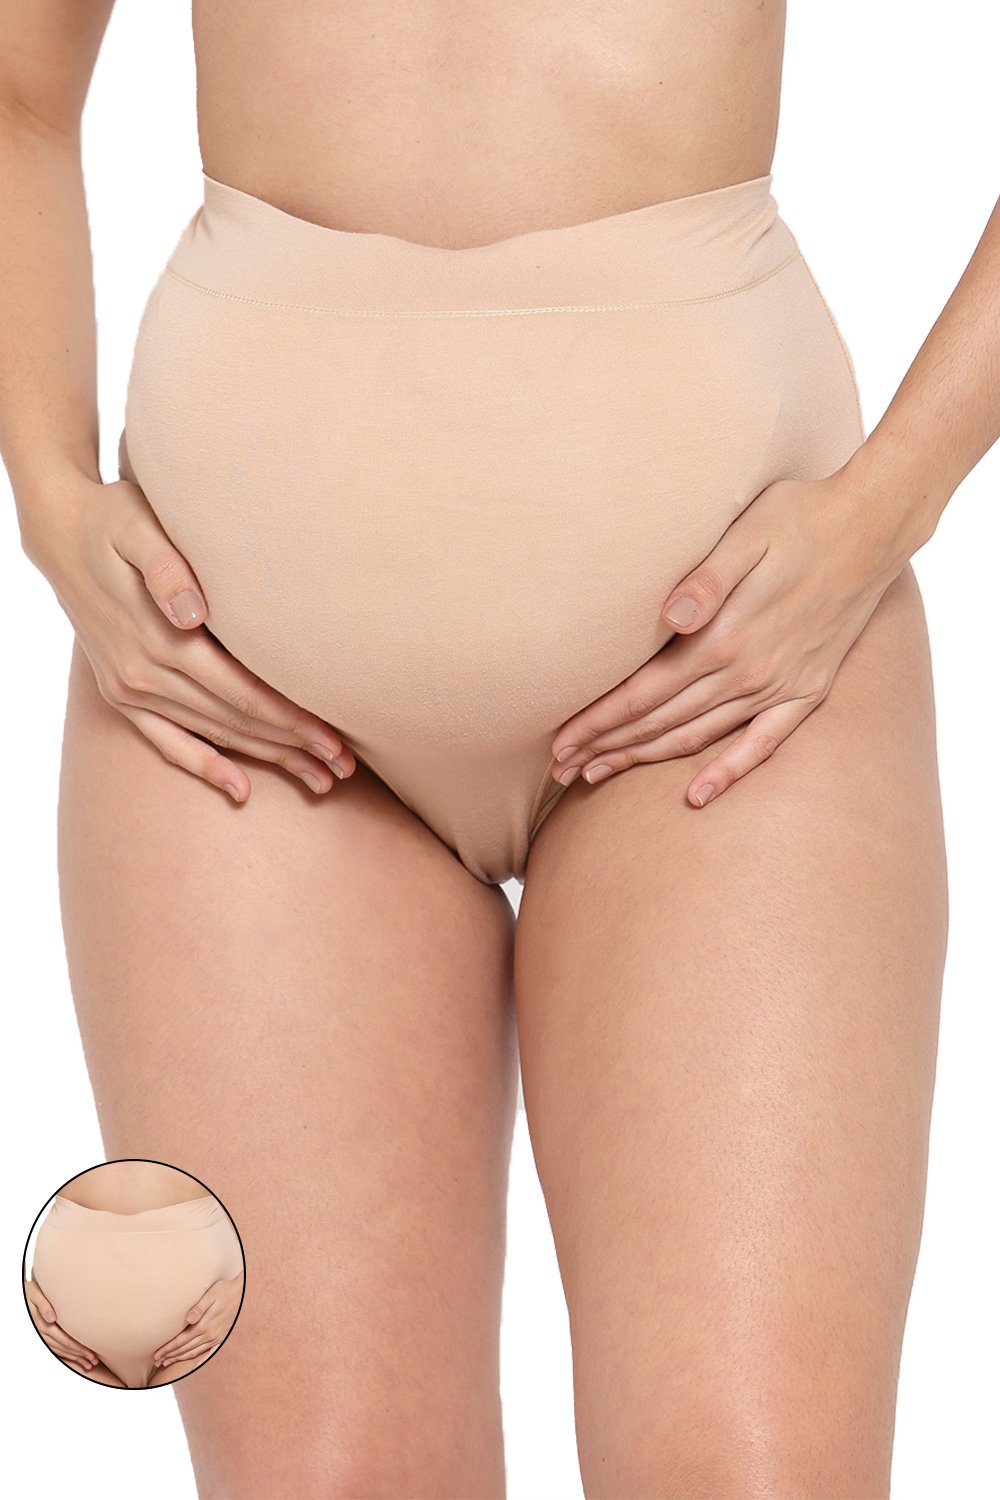 Organic Cotton Antimicrobial Maternity Panty- Pack of 2-IMPC101-Skin_Skin-